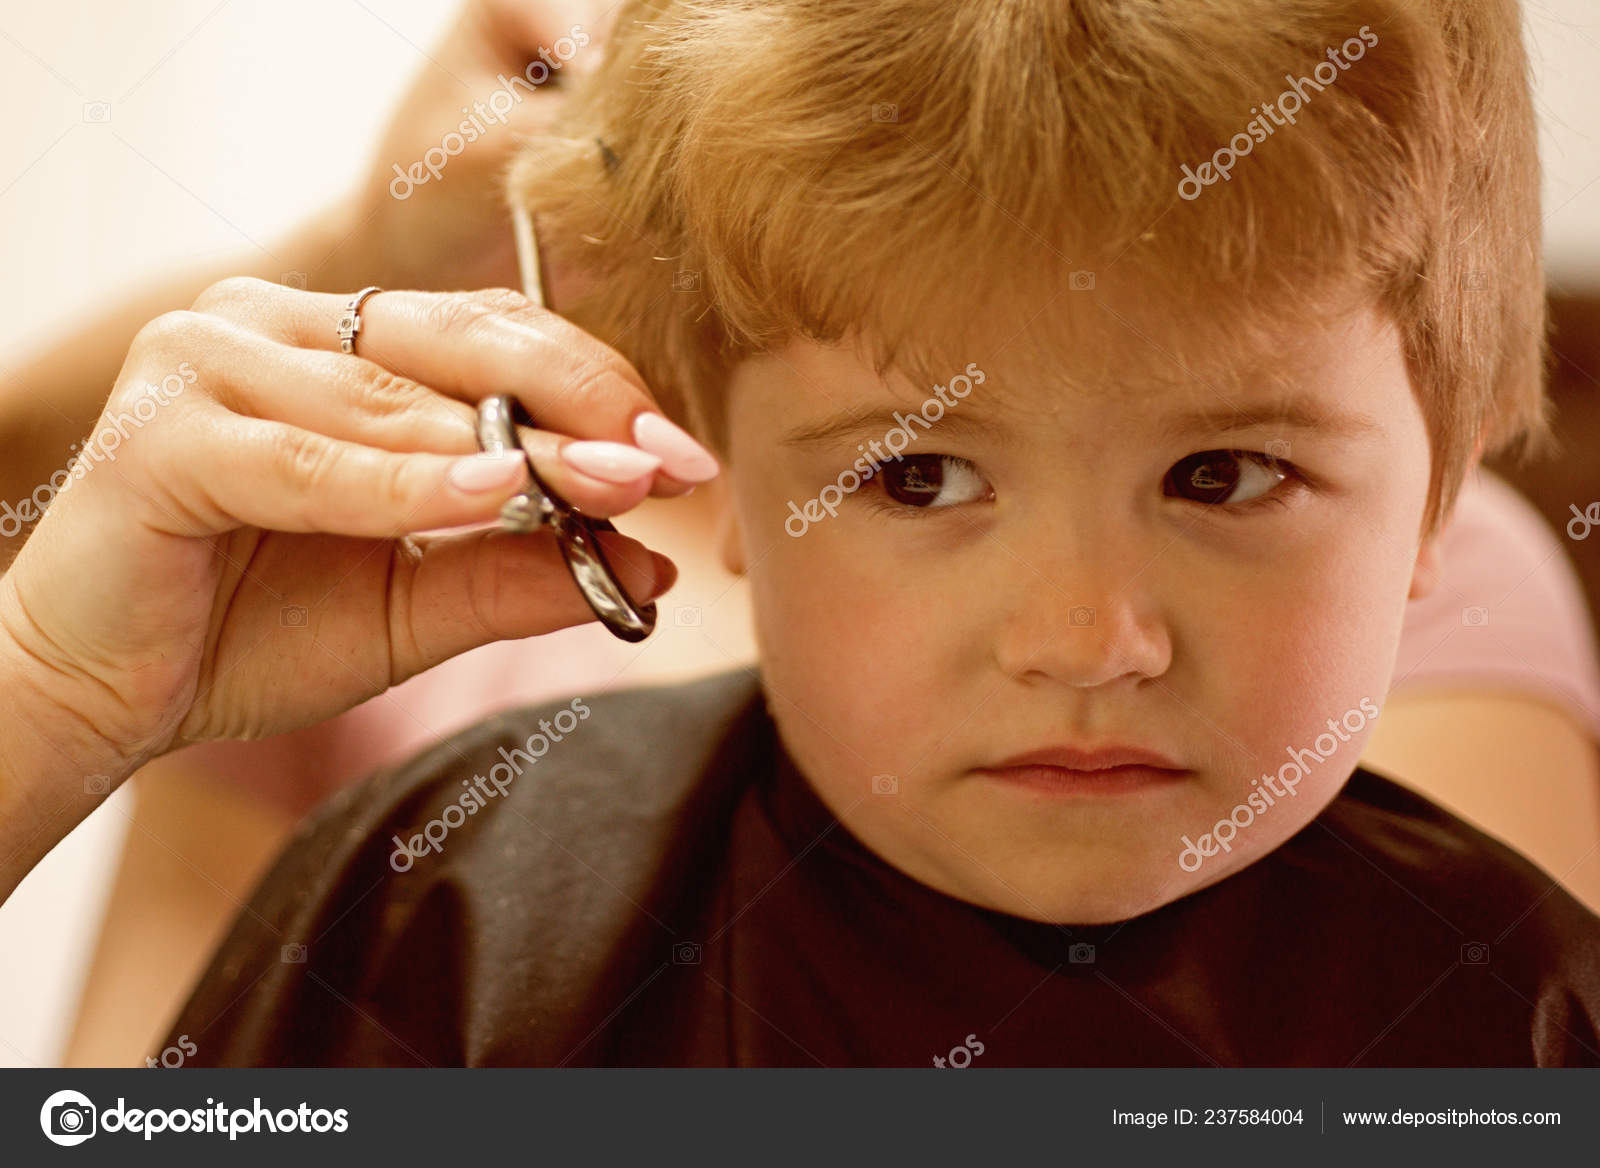 Rough Fringe Cut Little Child Given Haircut Small Child In